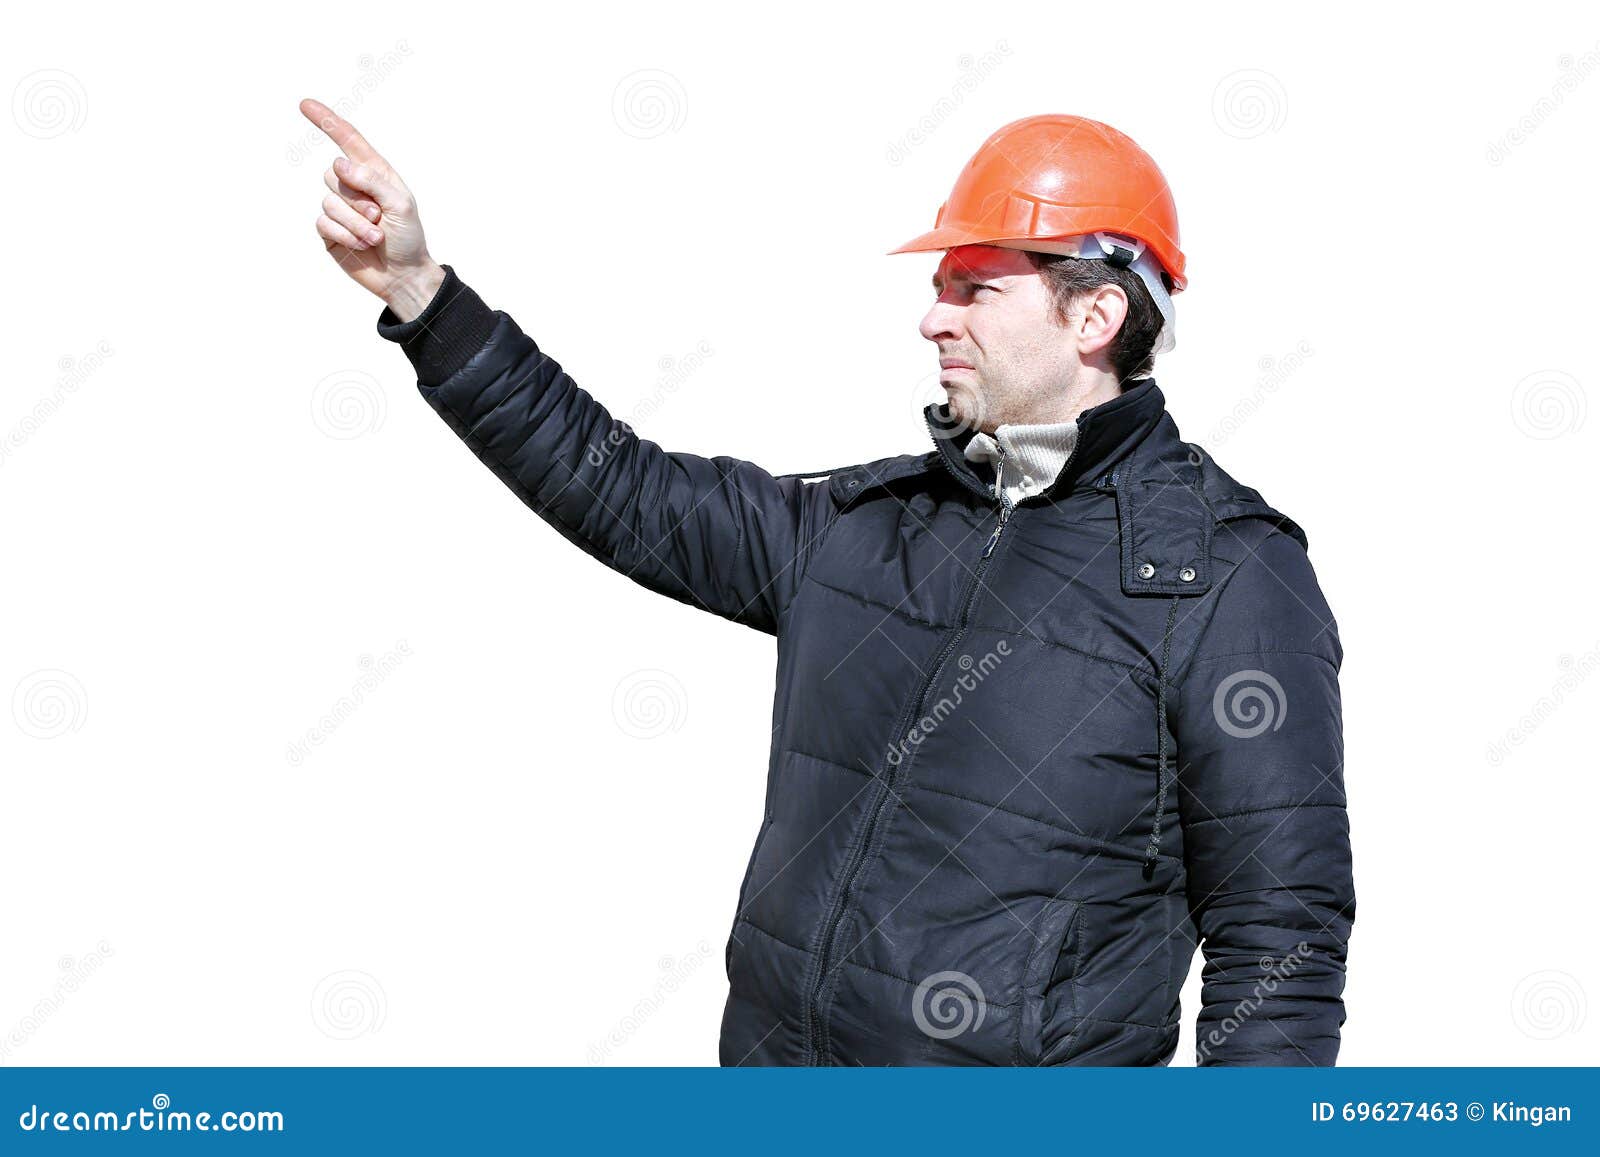 worker on a construction site in winter directs and hand gesticulating